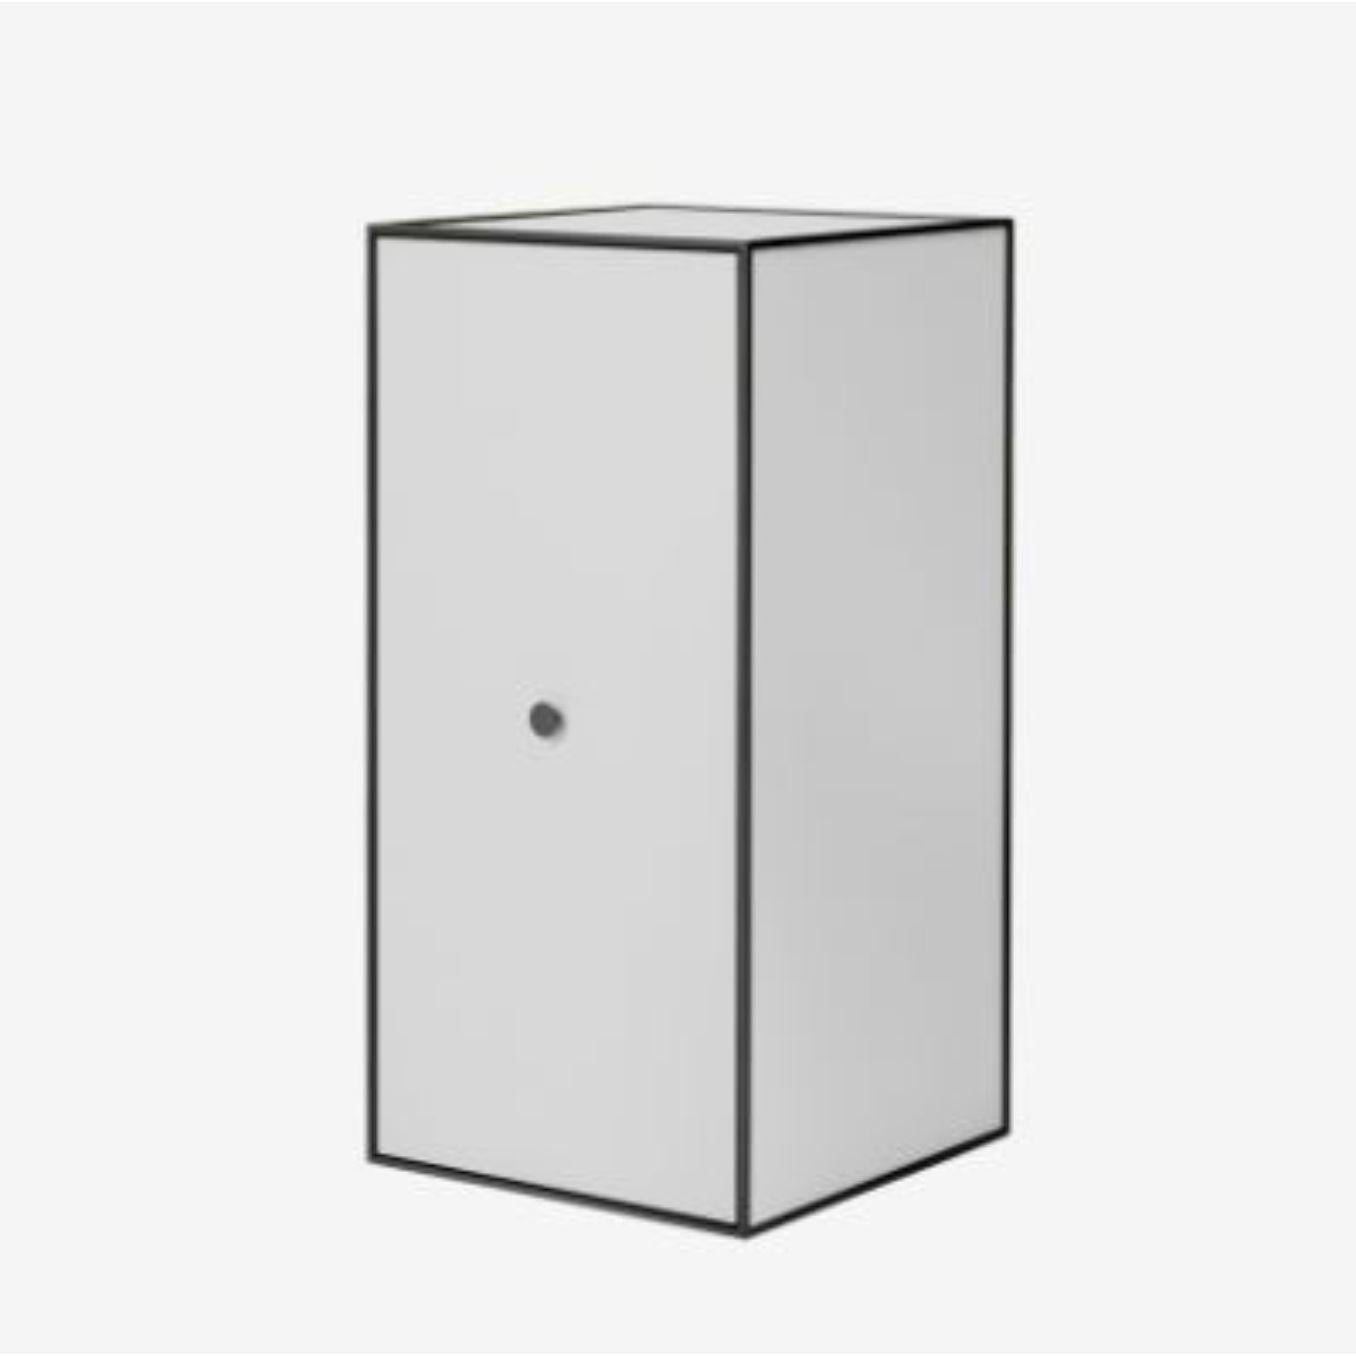 70 light grey frame box with 2 shelves / door by Lassen
Dimensions: D 35 x W 35 x H 70 cm 
Materials: Finér, Melamin, Melamin, Melamine, Metal, Veneer
Also available in different colours and dimensions. 
Weight: 13 Kg


By Lassen is a Danish